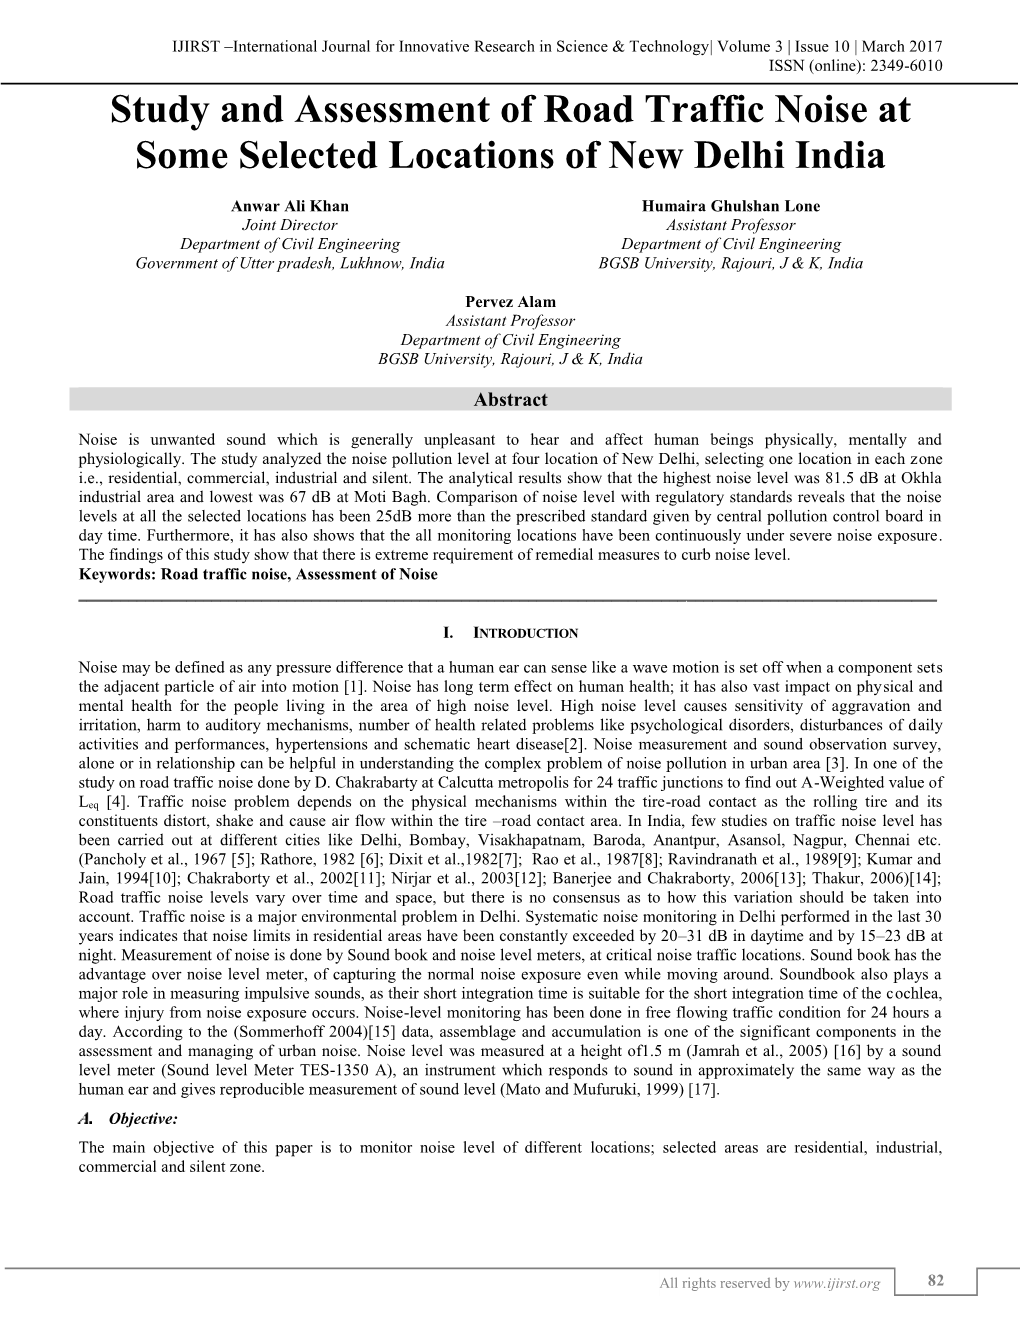 Study and Assessment of Road Traffic Noise at Some Selected Locations of New Delhi India (IJIRST/ Volume 3 / Issue 10/ 015)